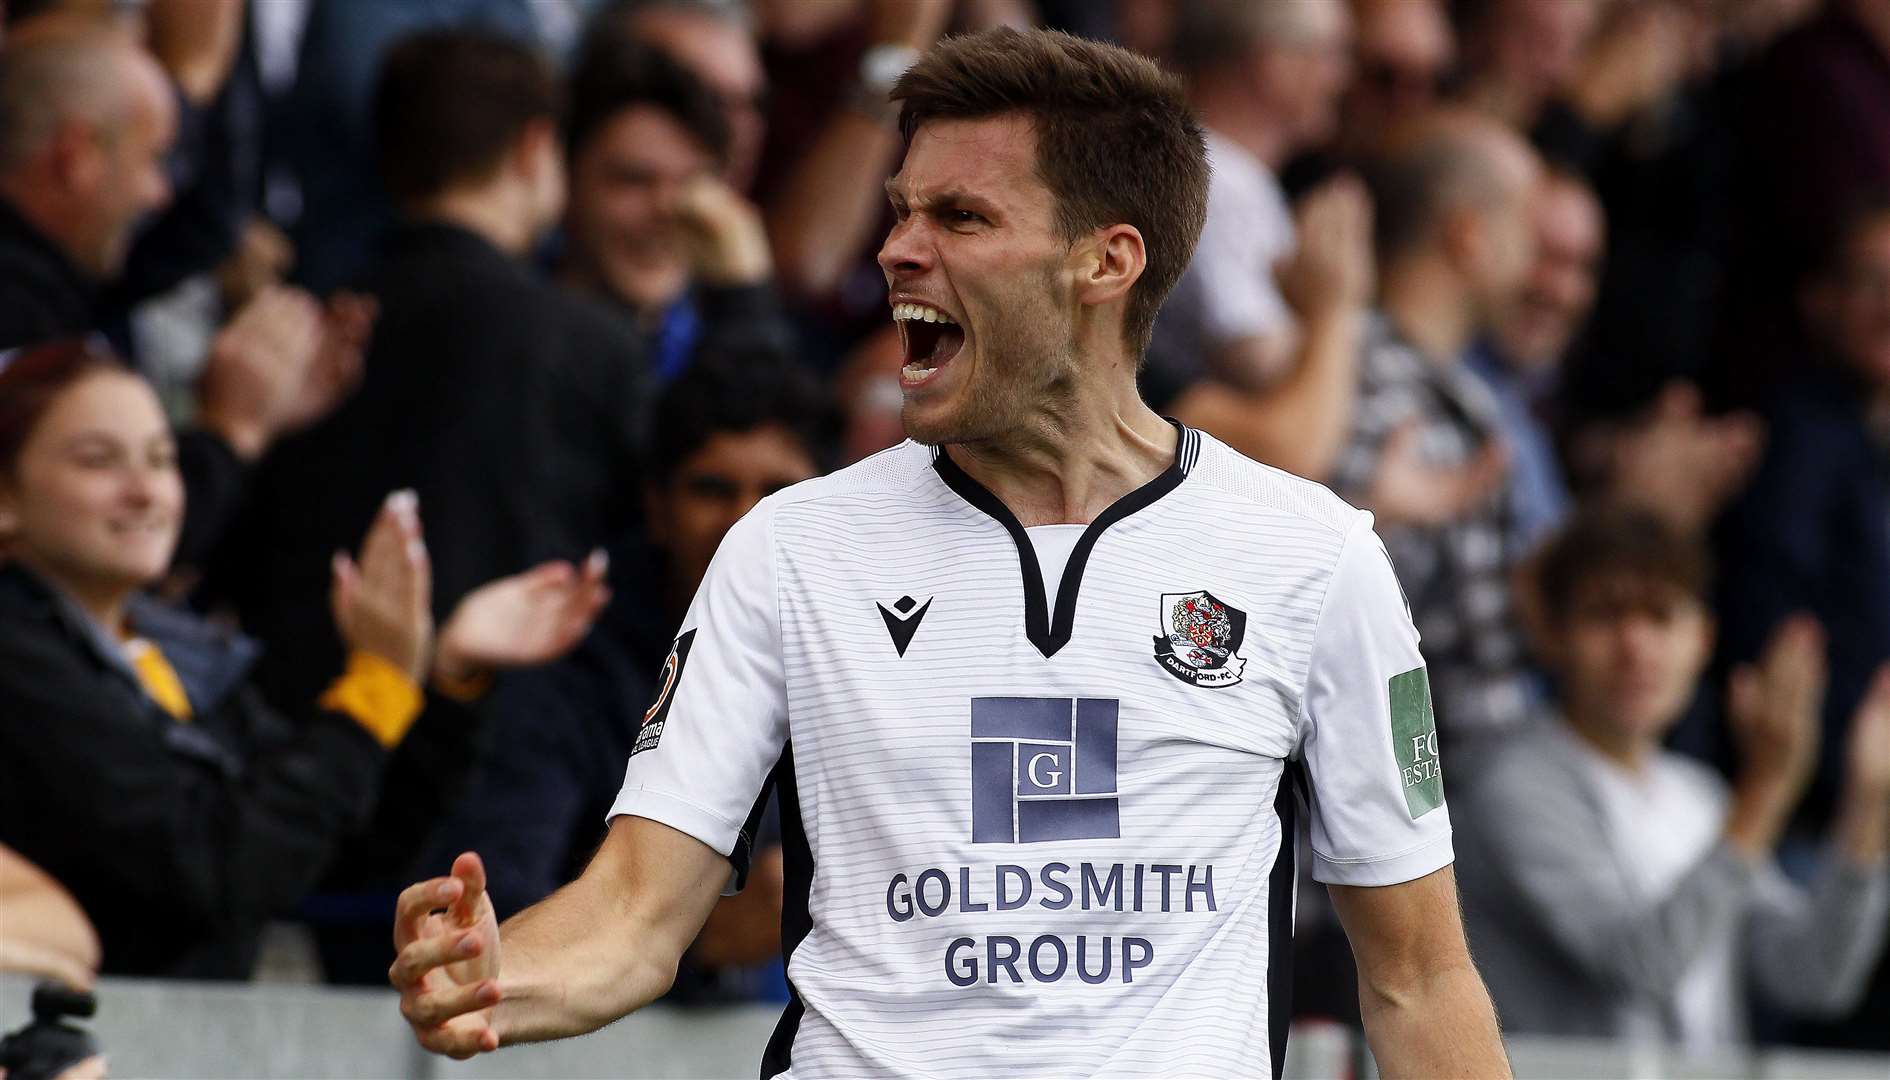 Charlie Sheringham is staying on for another season at Dartford